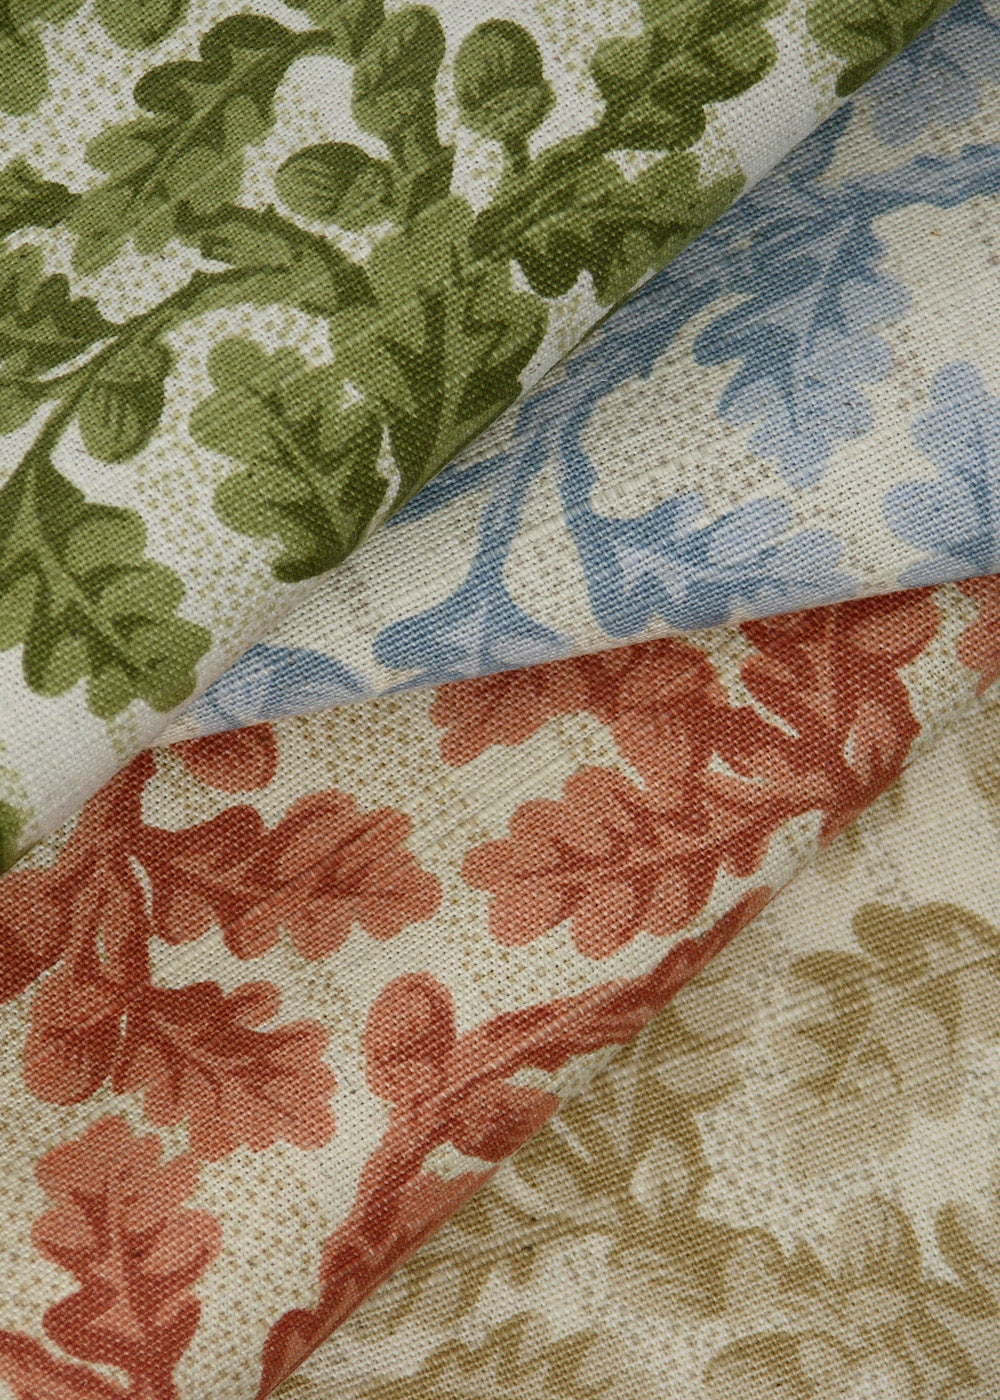 linen fabric printed with small-scale oak leaves and acorns, in several colorways